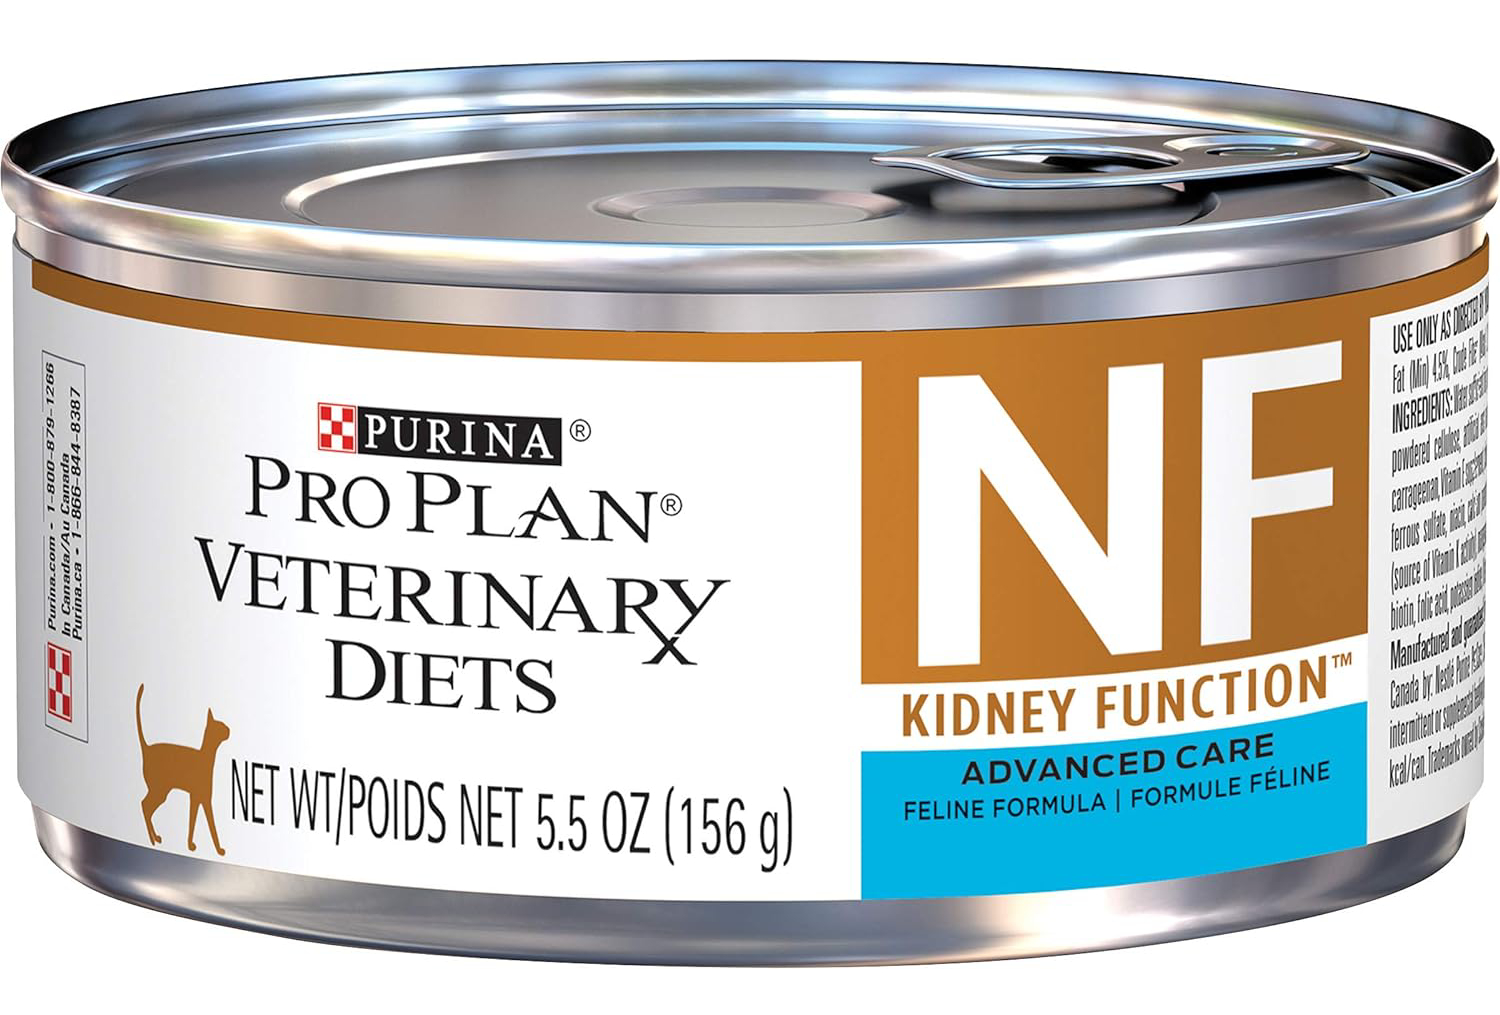 Purina Pro Plan Veterinary Diets 17903 Ppvd Nf Advn Care Feline Cat Food